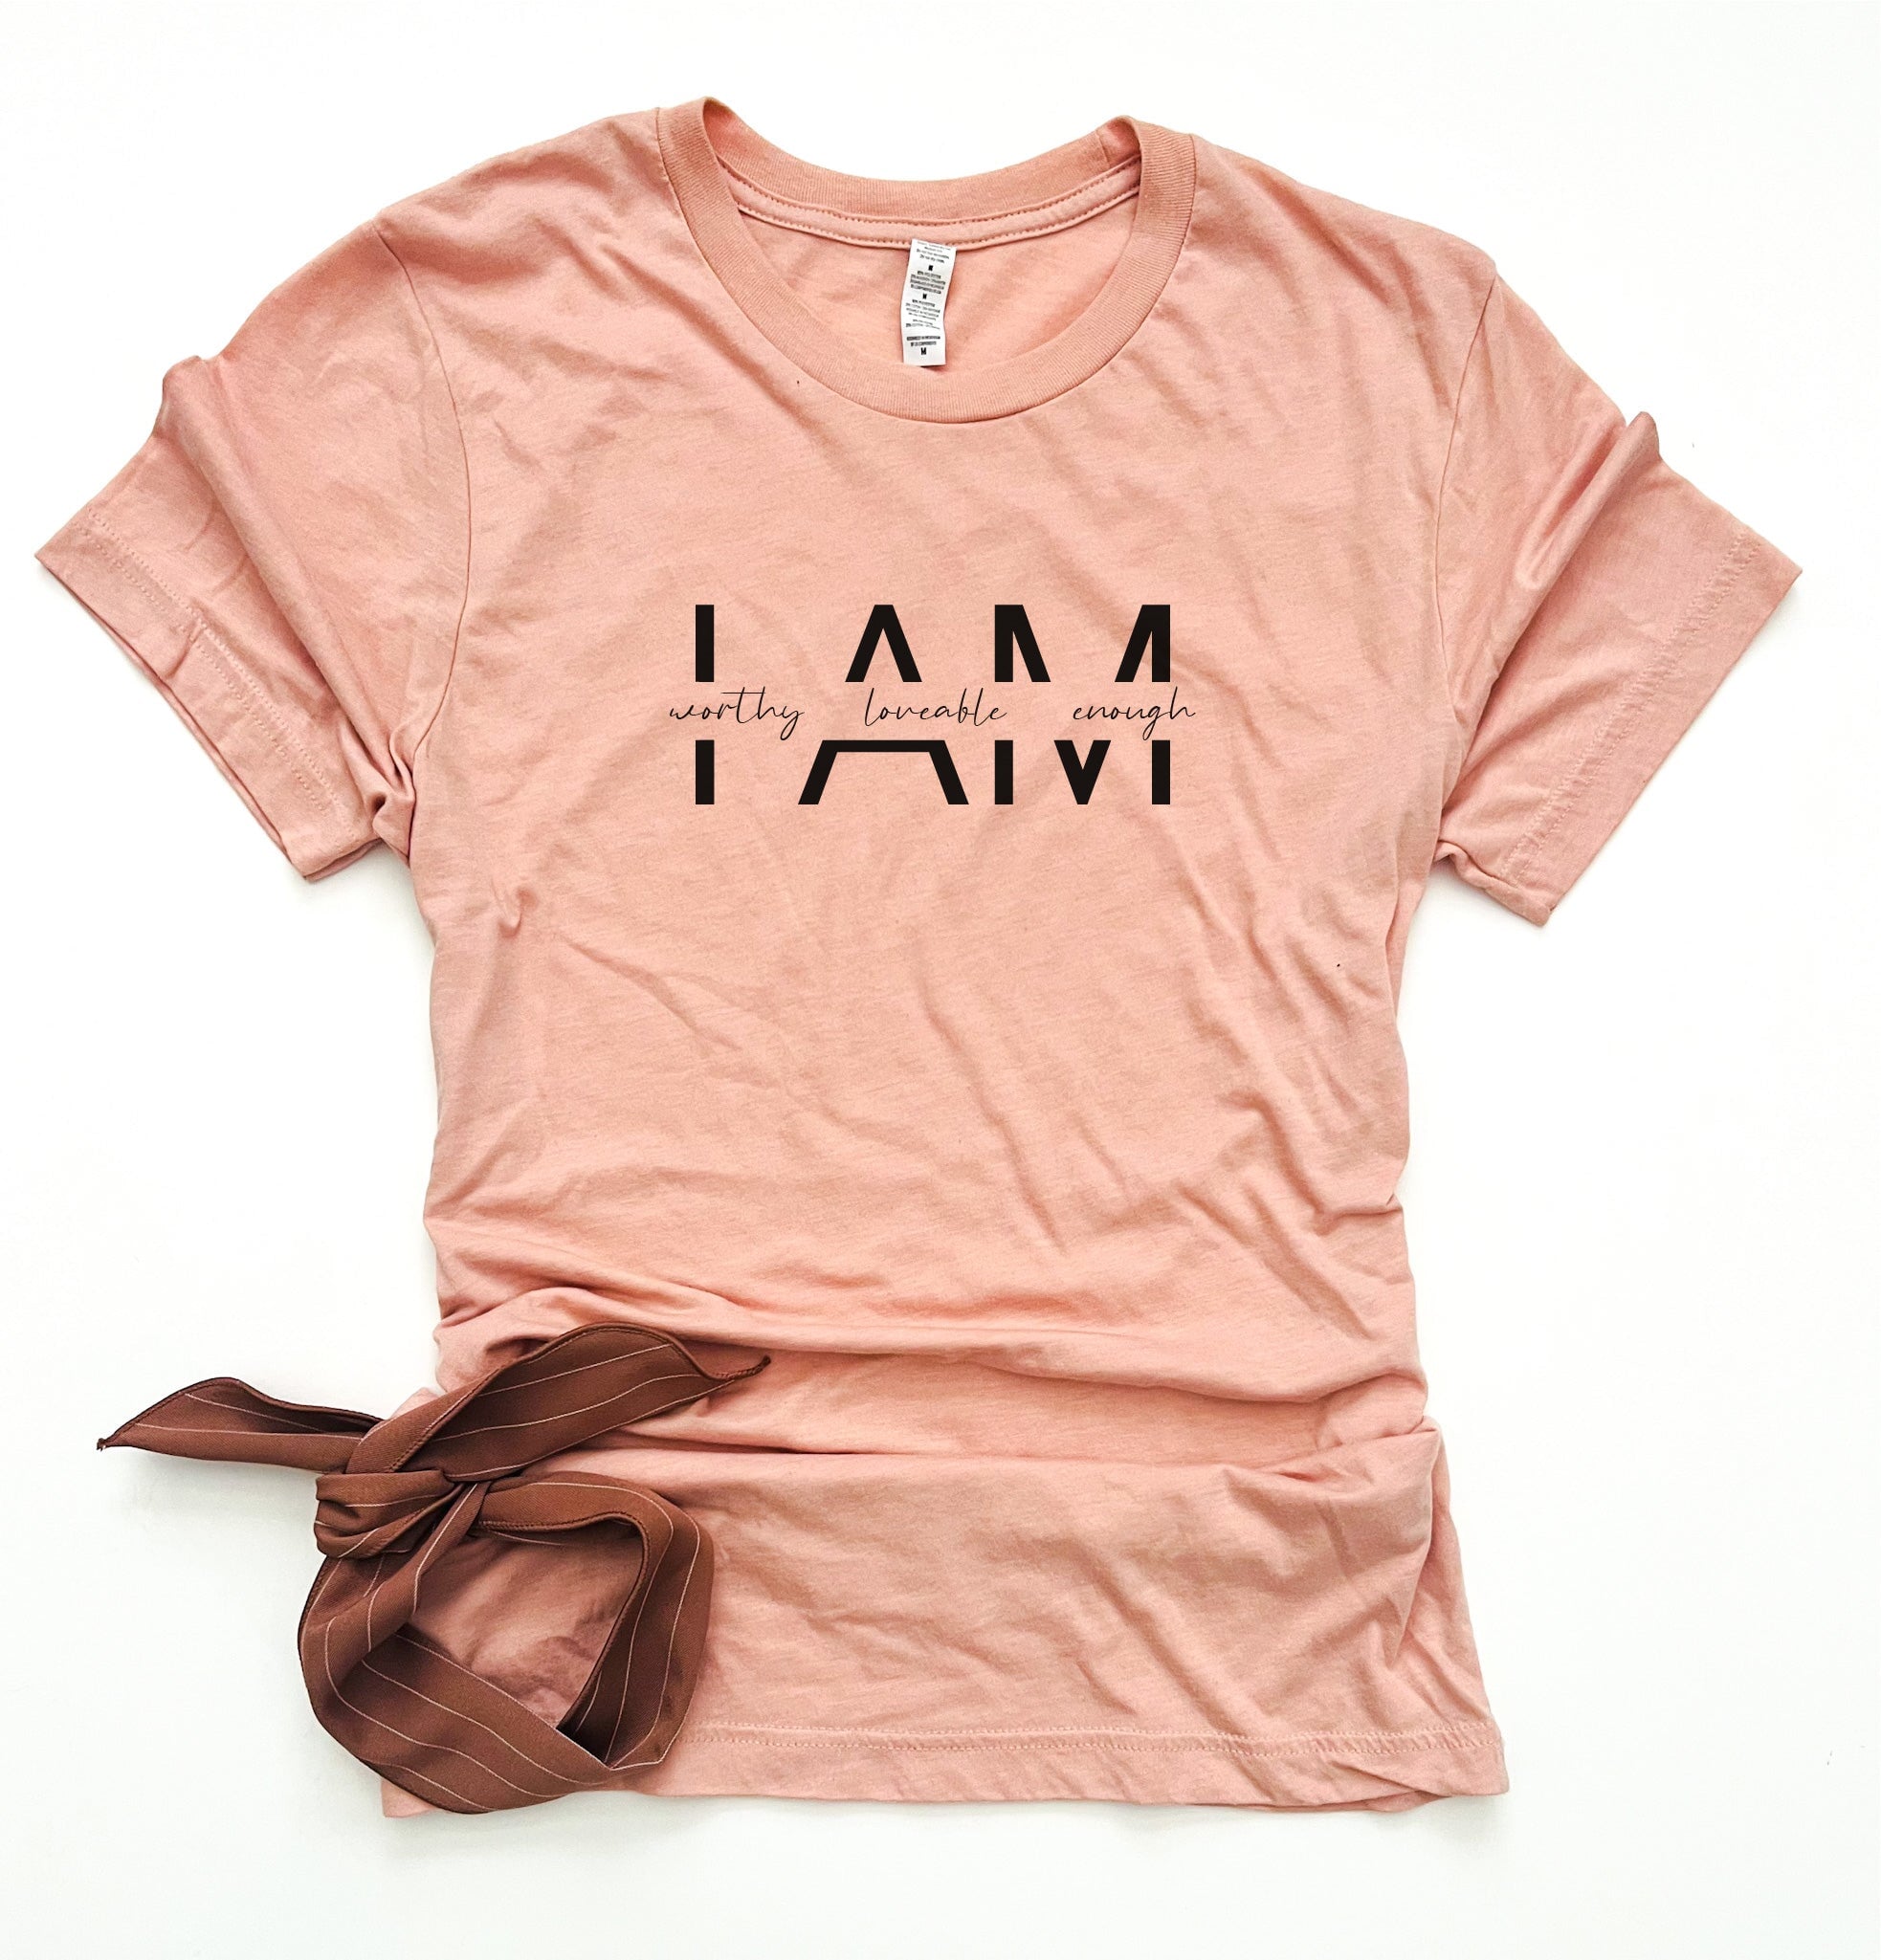 I am worthy loveable enough tee Affirmation collection Bella Canvas 3001 